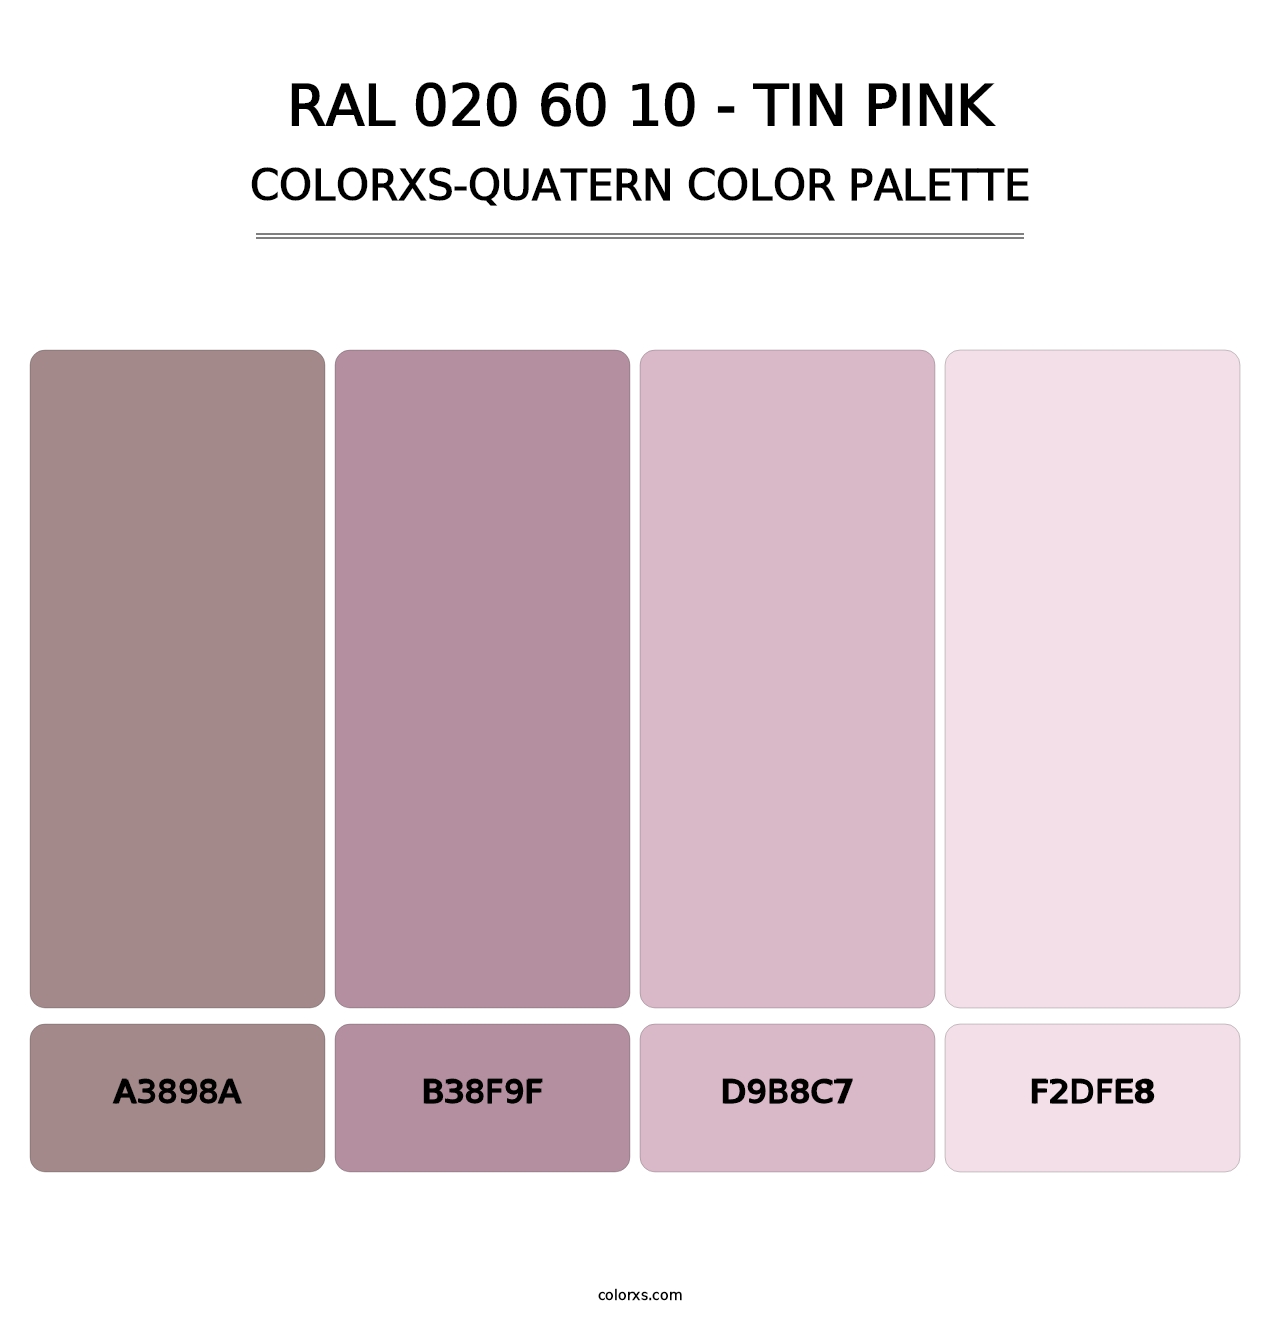 RAL 020 60 10 - Tin Pink - Colorxs Quatern Palette